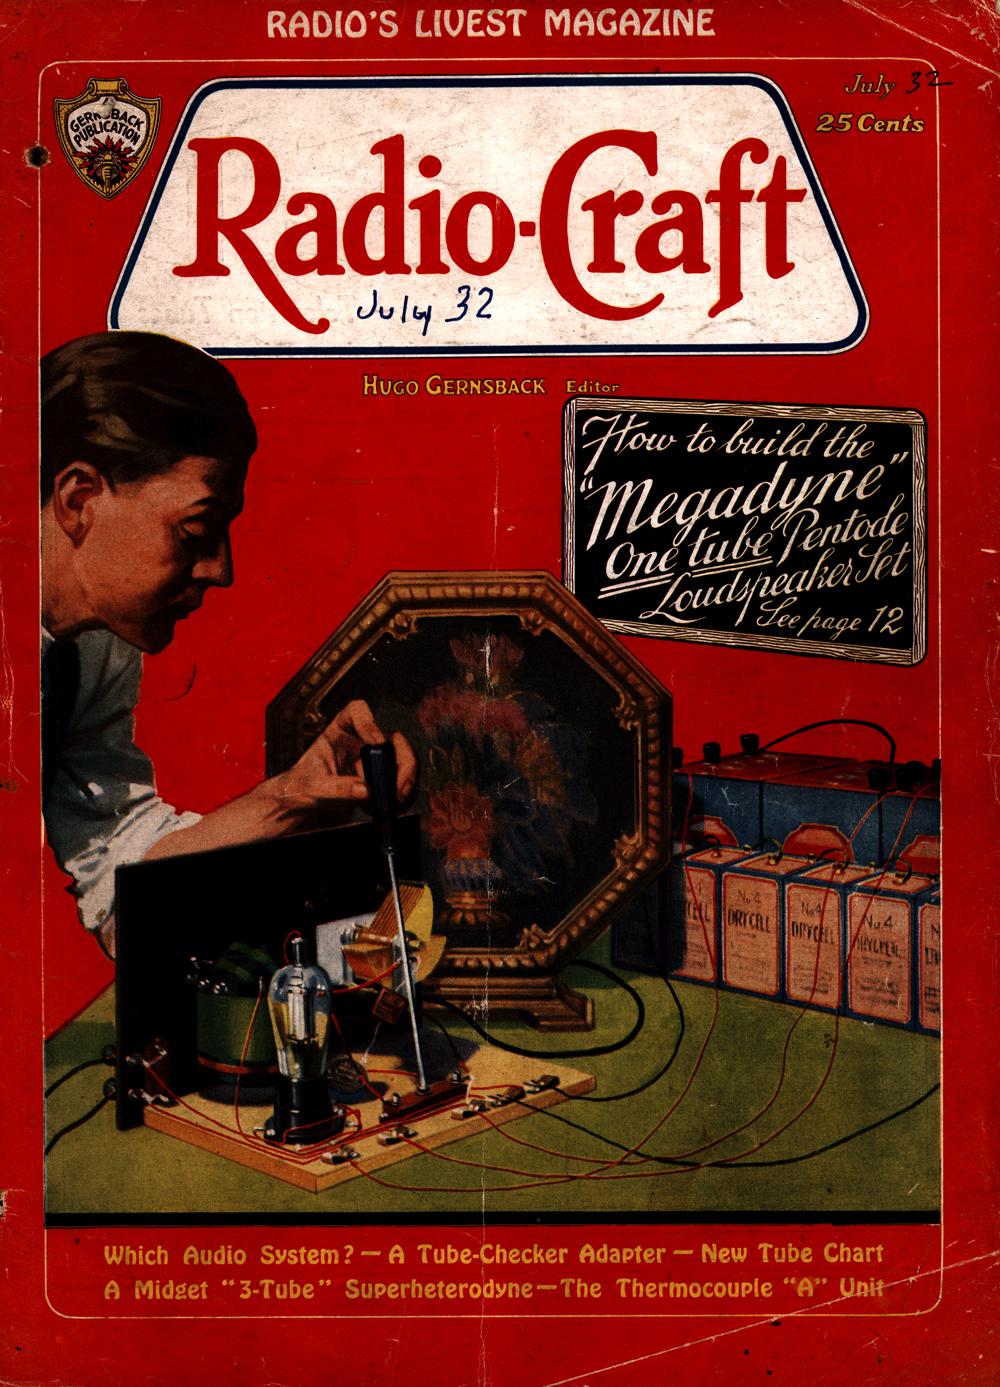 1932 - Radio-craft. and popular electronics; radio-electronics in all its phases - Vol. 4, No. 1